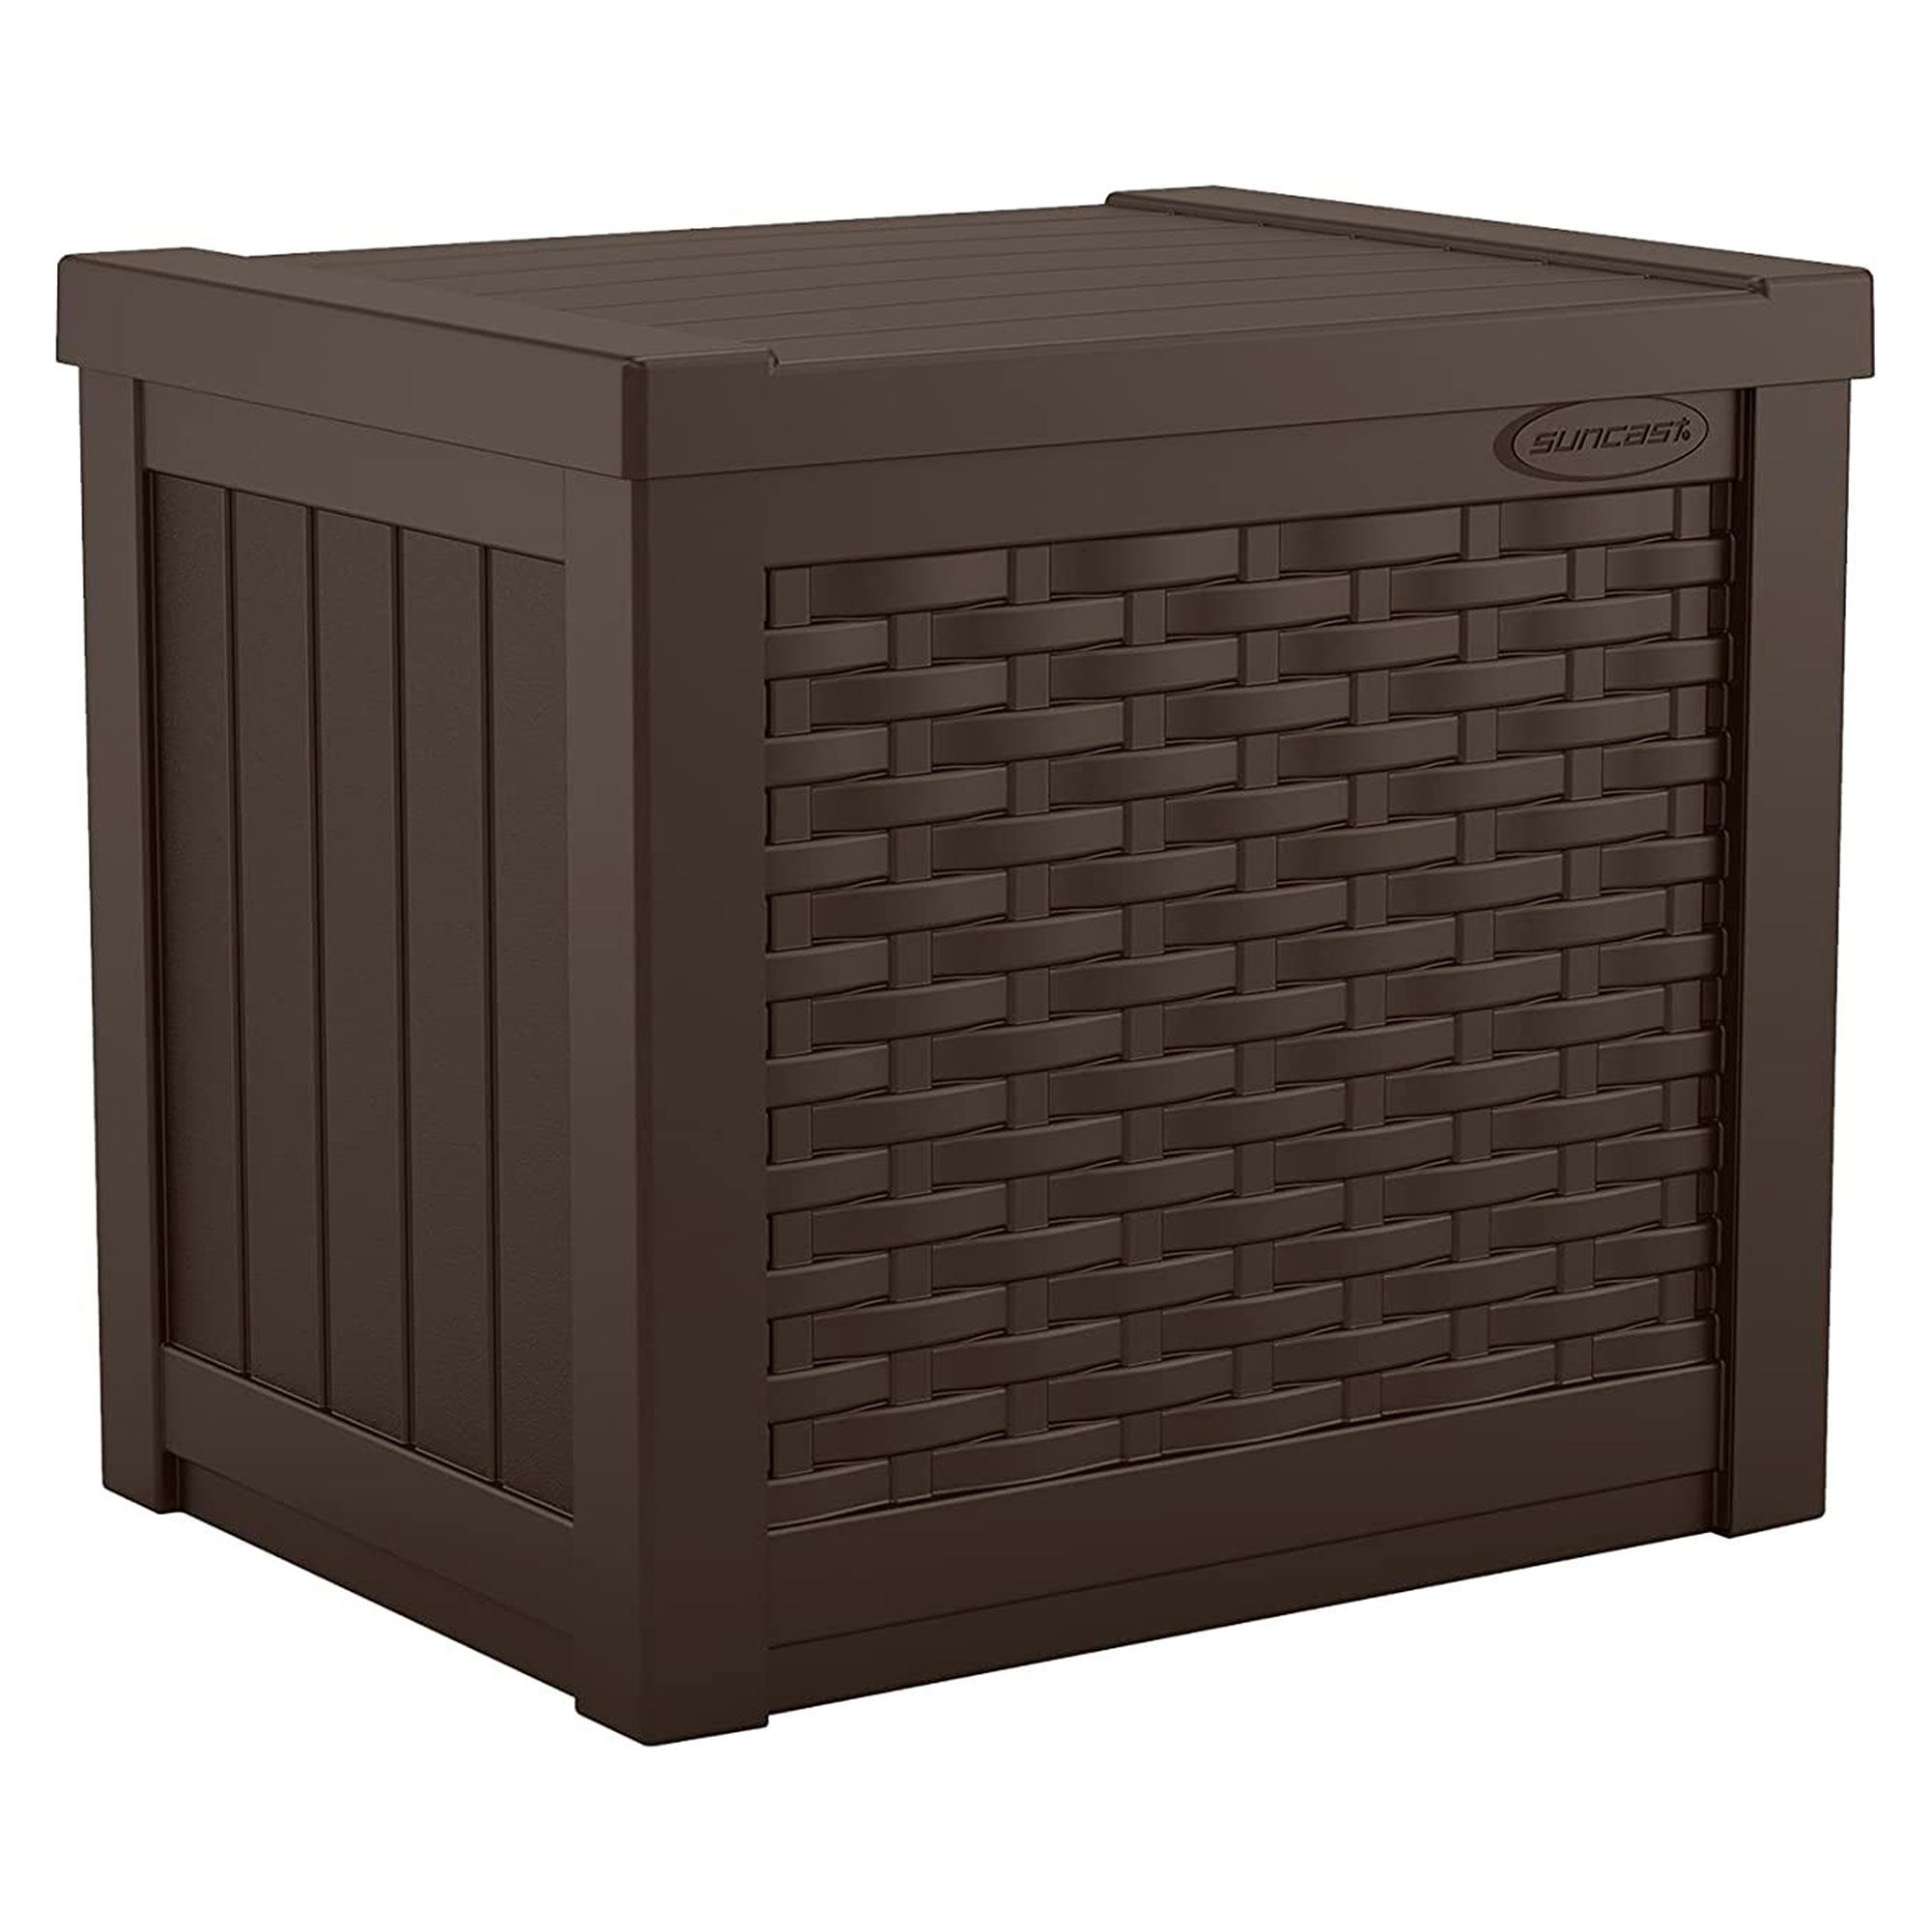 Suncast 22 Gal Outdoor Patio Small Deck Box w/ Storage Seat, Java (2 Pack) - image 2 of 10